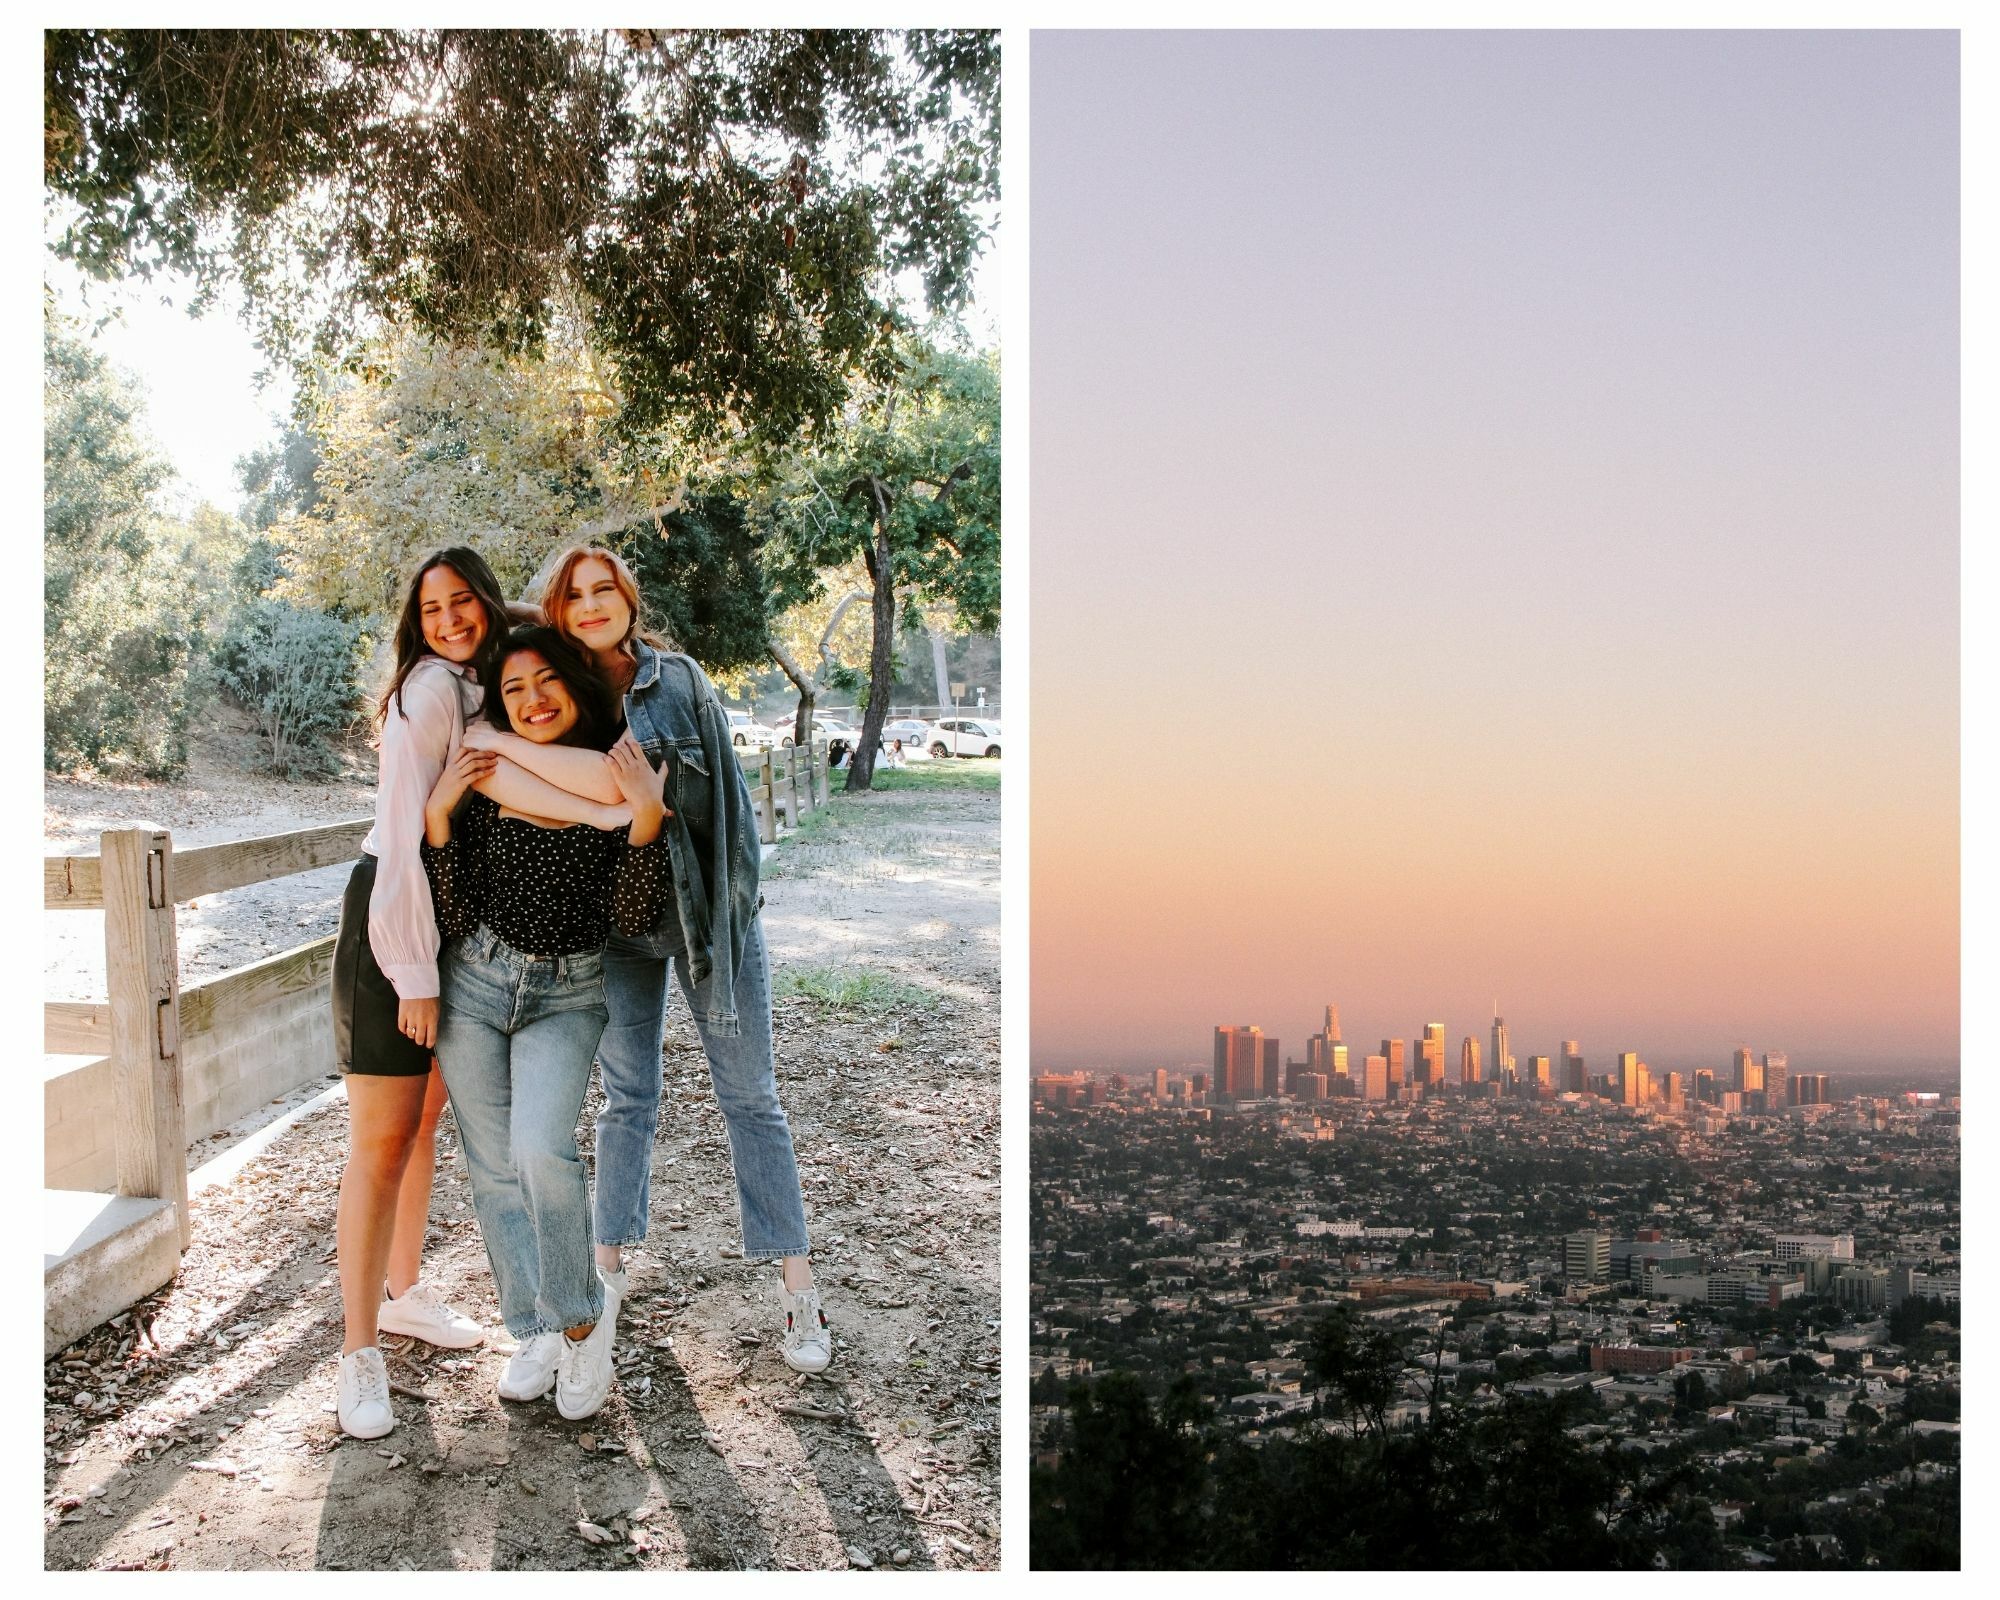 There's two photos in one: Maggie and her two friends in a farm-like area, smiling for the camera. The other photo is a picture of LA at sunset, the smog makes it so the city looks like a hazy fire.